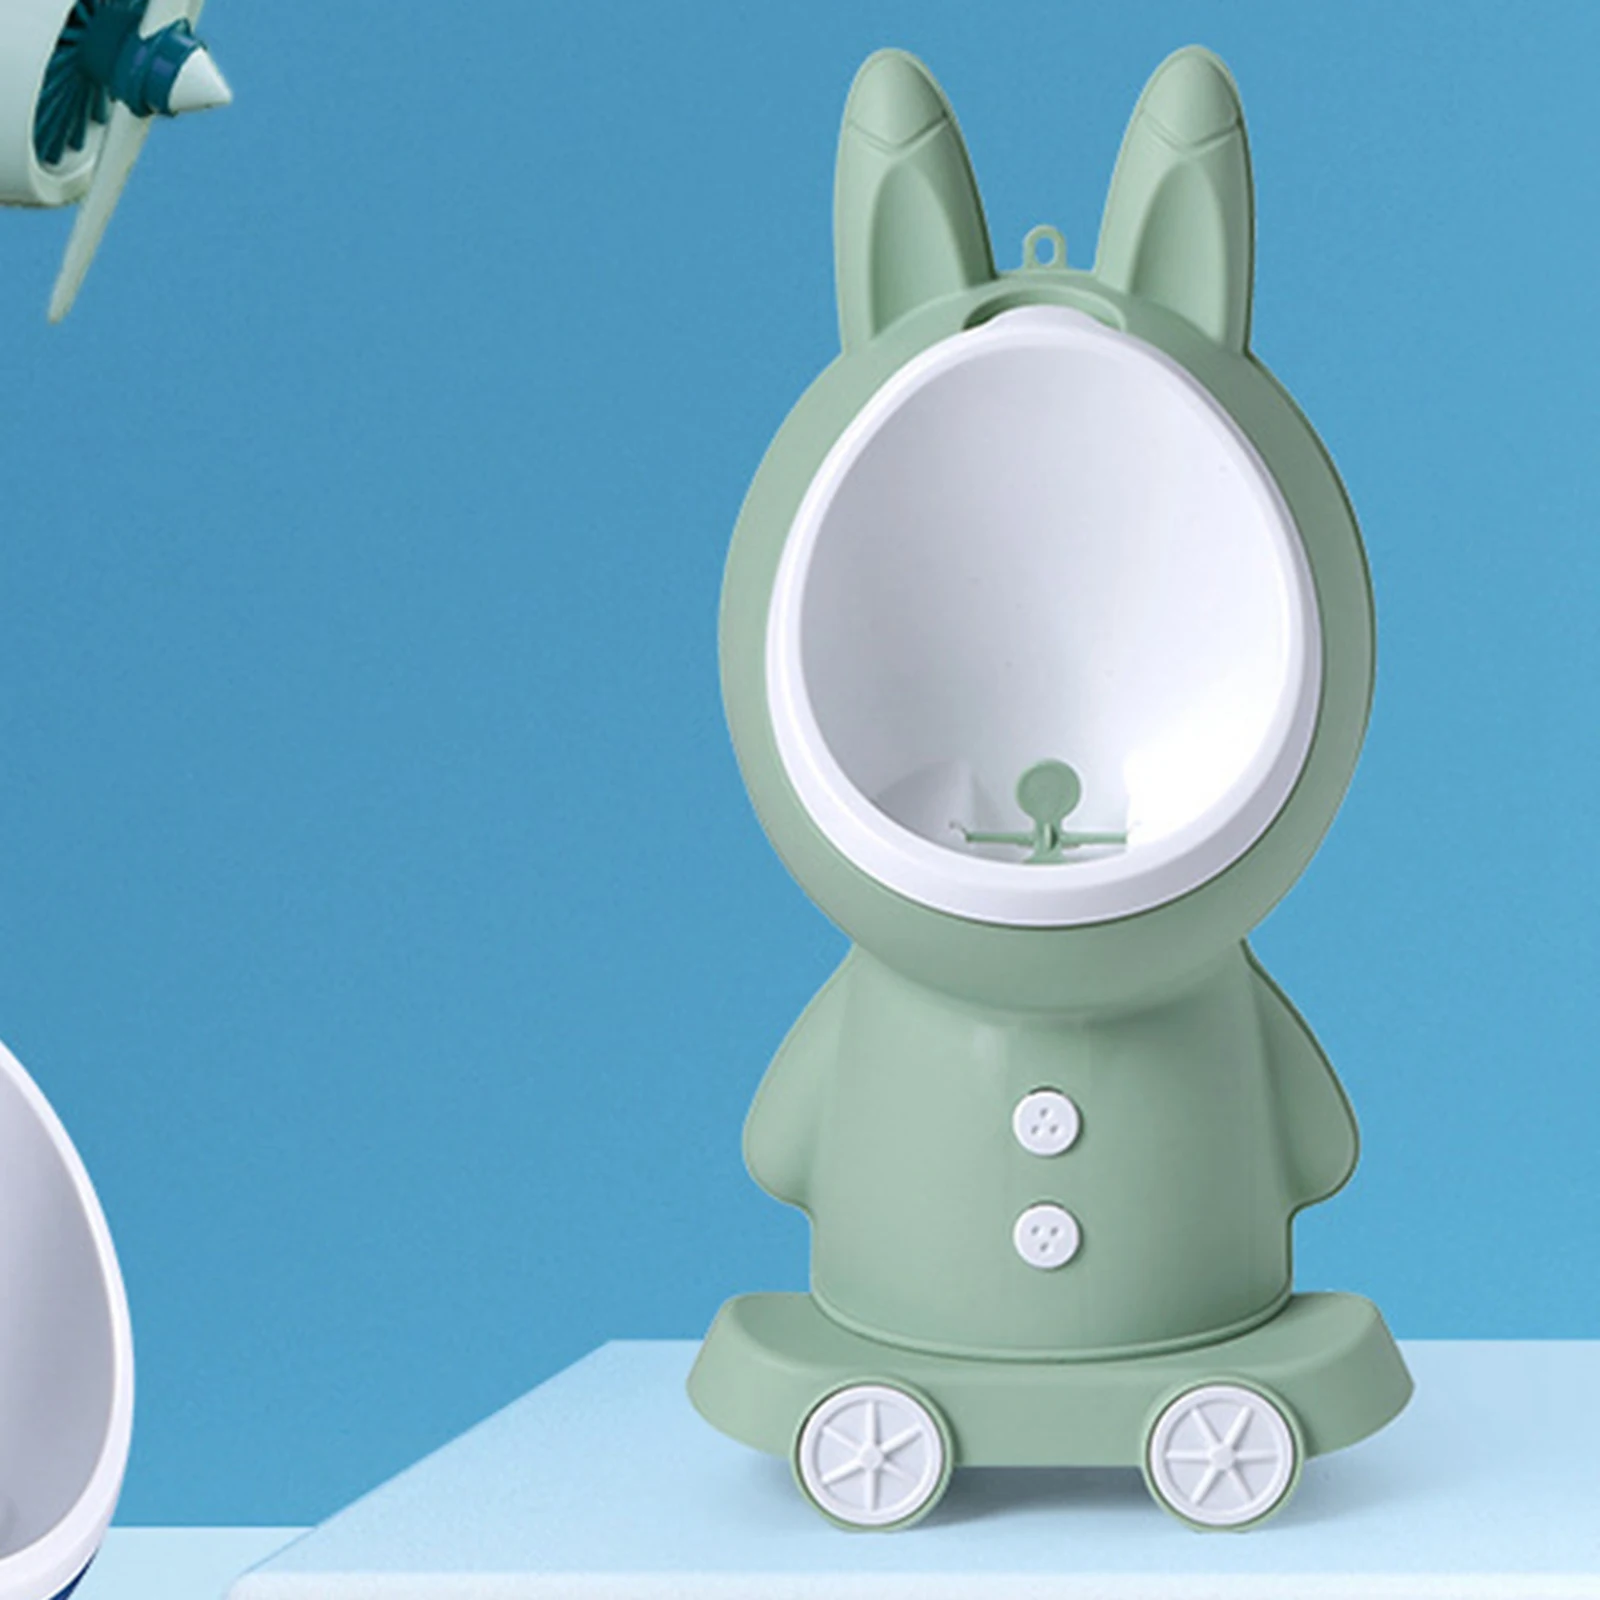 Rabbit Little Boys Potty Urinal Standing Pee Toilet with Funny Aiming Target 2 to 6 Years Old for Pee Trainer